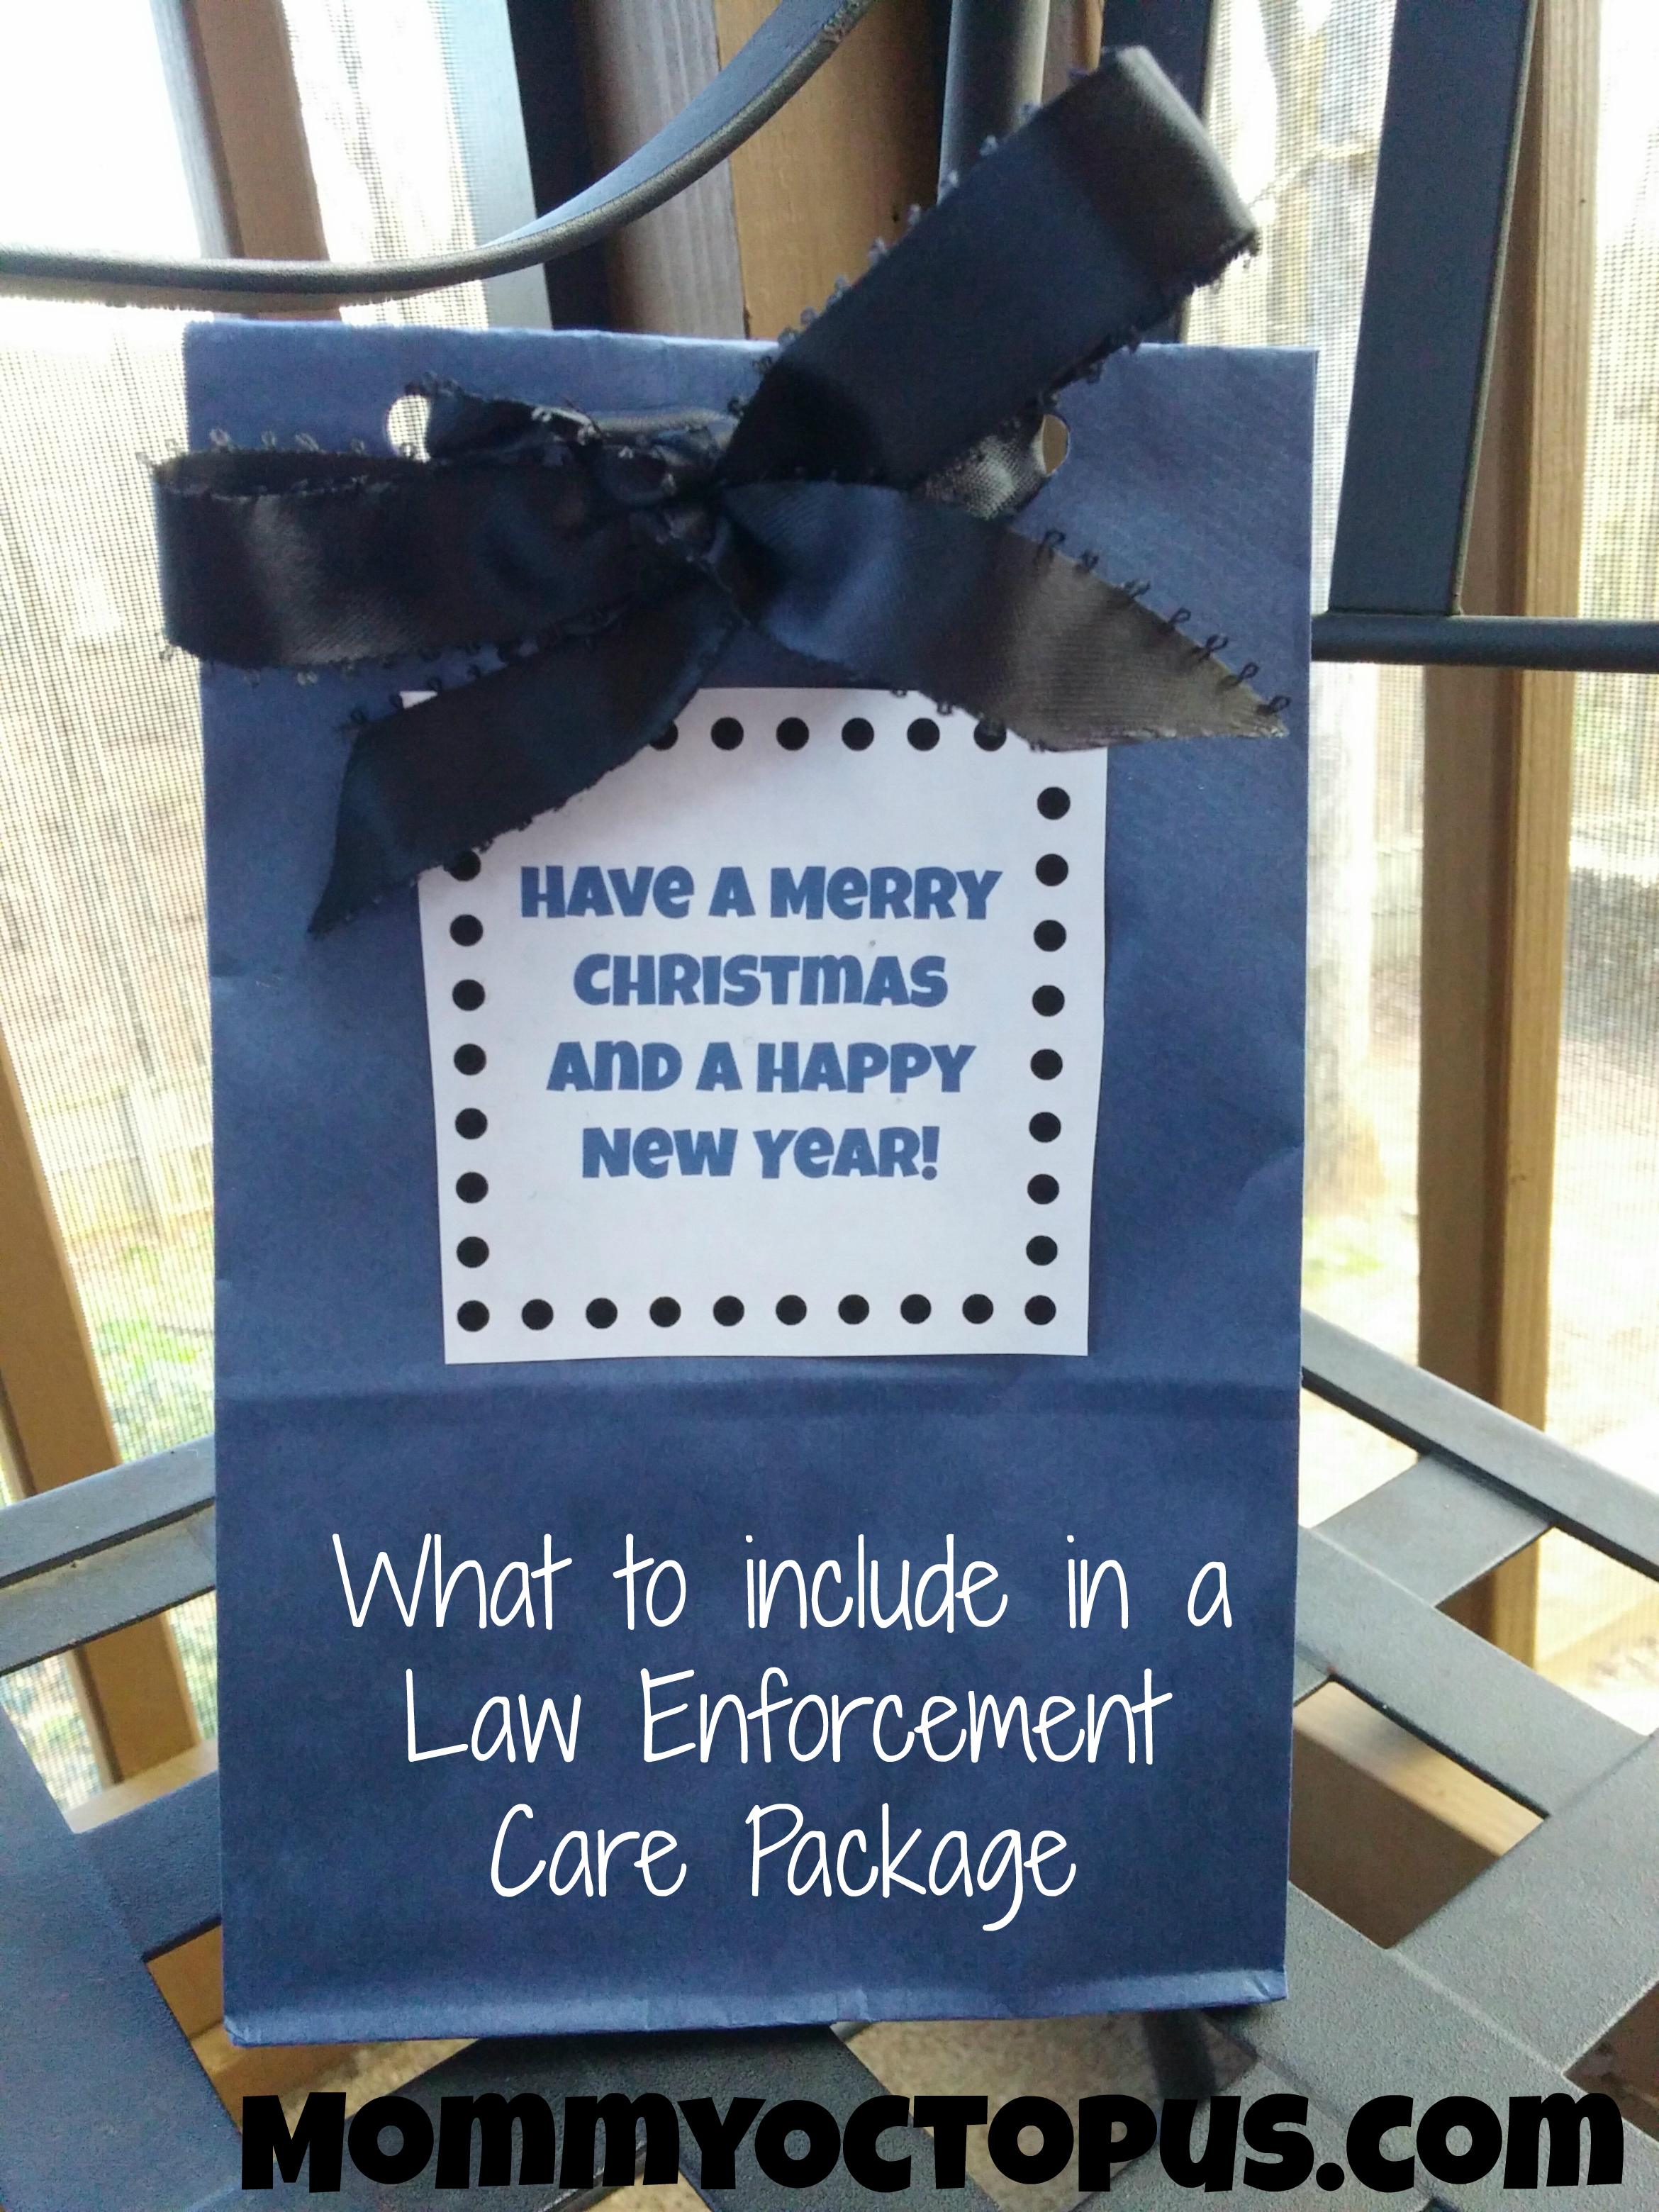 What to include in a Law Enforcement Care Package